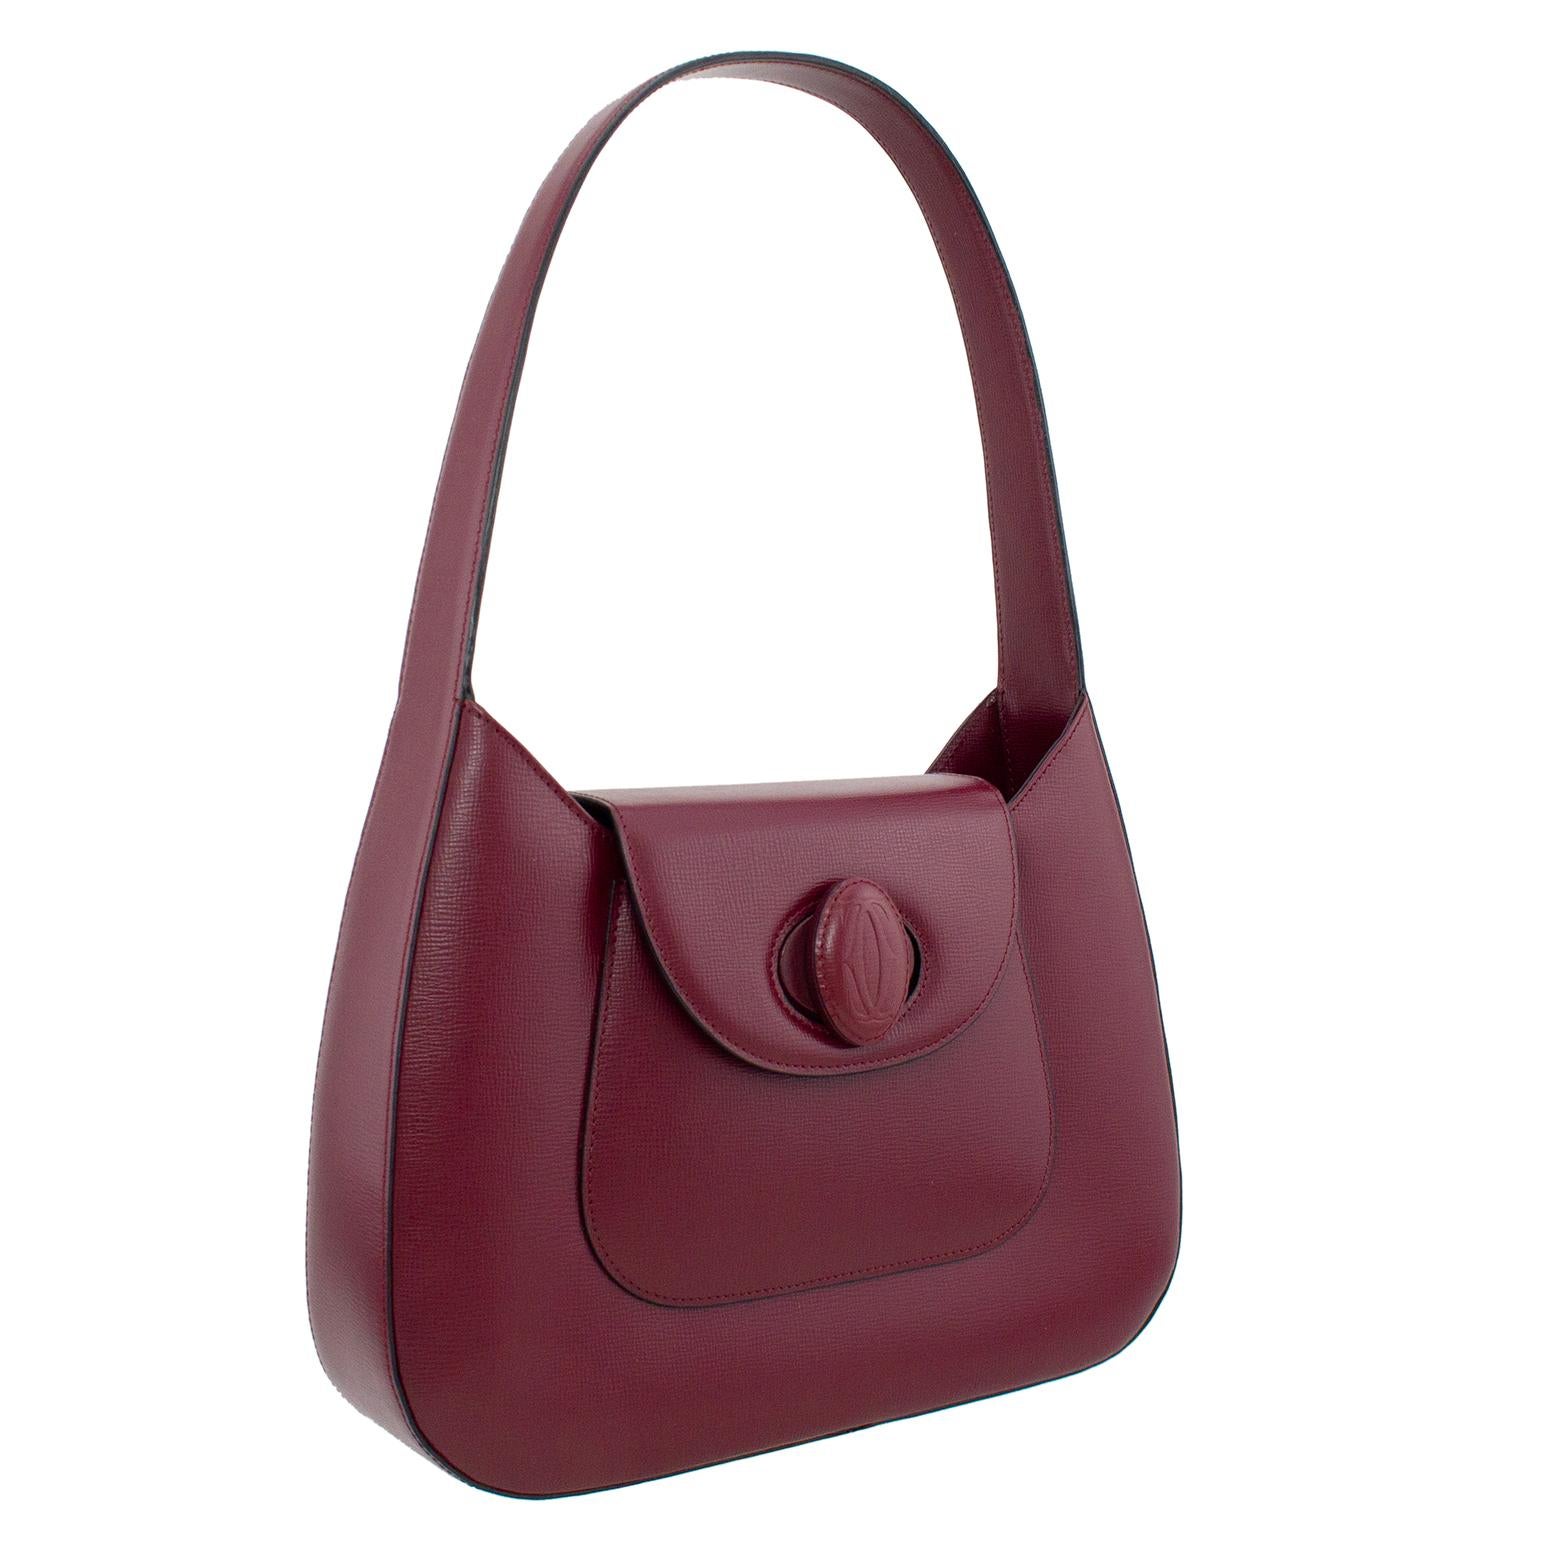 Cartier maroon pebbled leather structured handbag from the 1990s. Long stiff single handle and flap top closure with an oval shaped twist lock. Single slit front exterior pocket. Interior is lined in Maroon Cartier logo fabric with a large